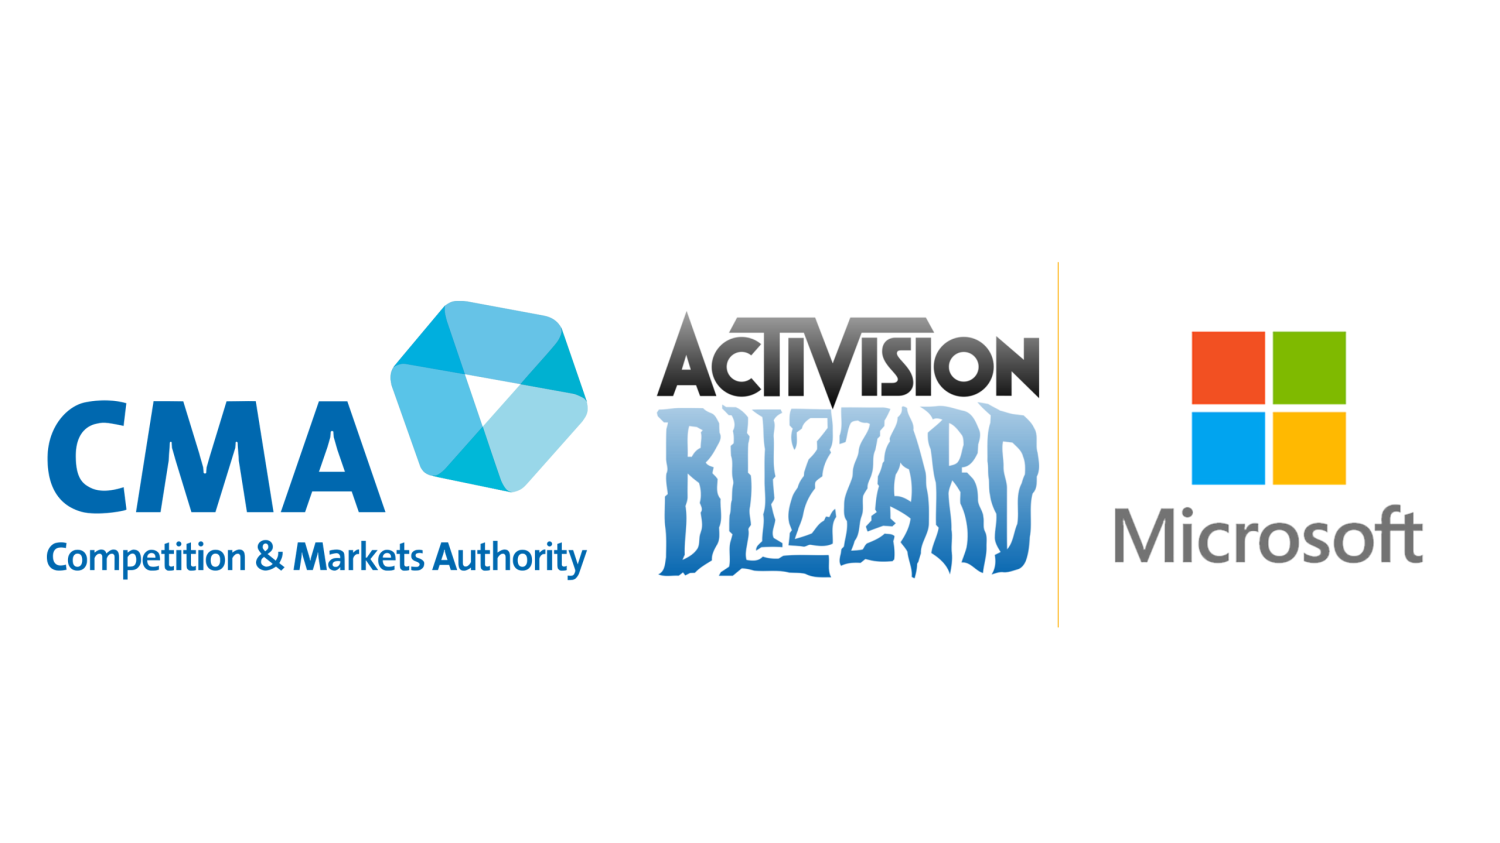 MICROSOFT/ACTIVISION deal - CMA pressured by new application 